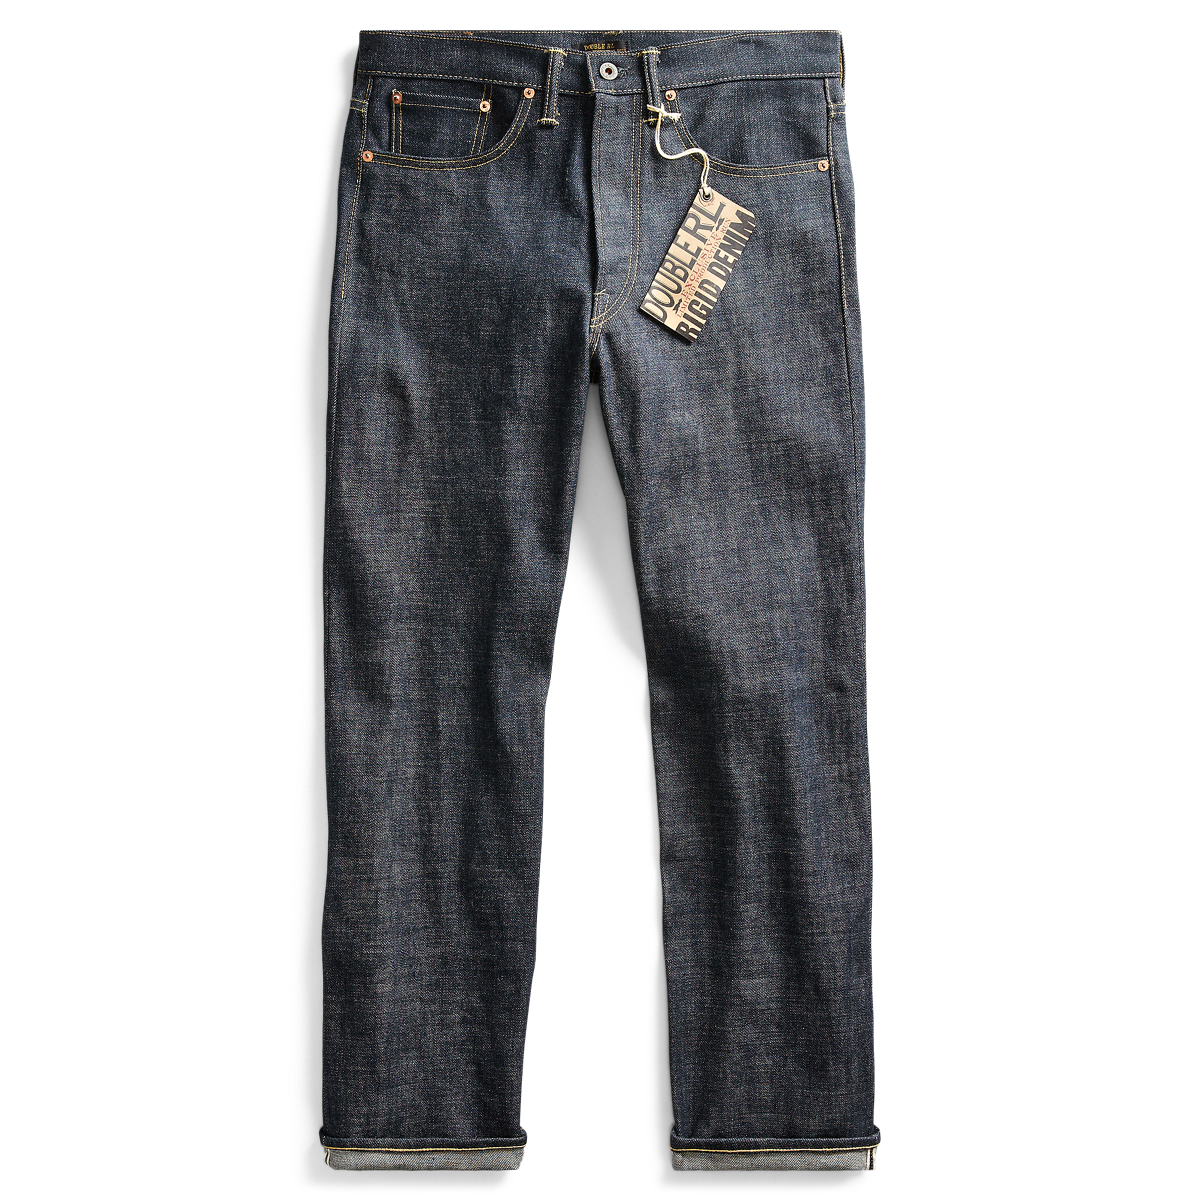 Limited-Edition Selvedge Jean